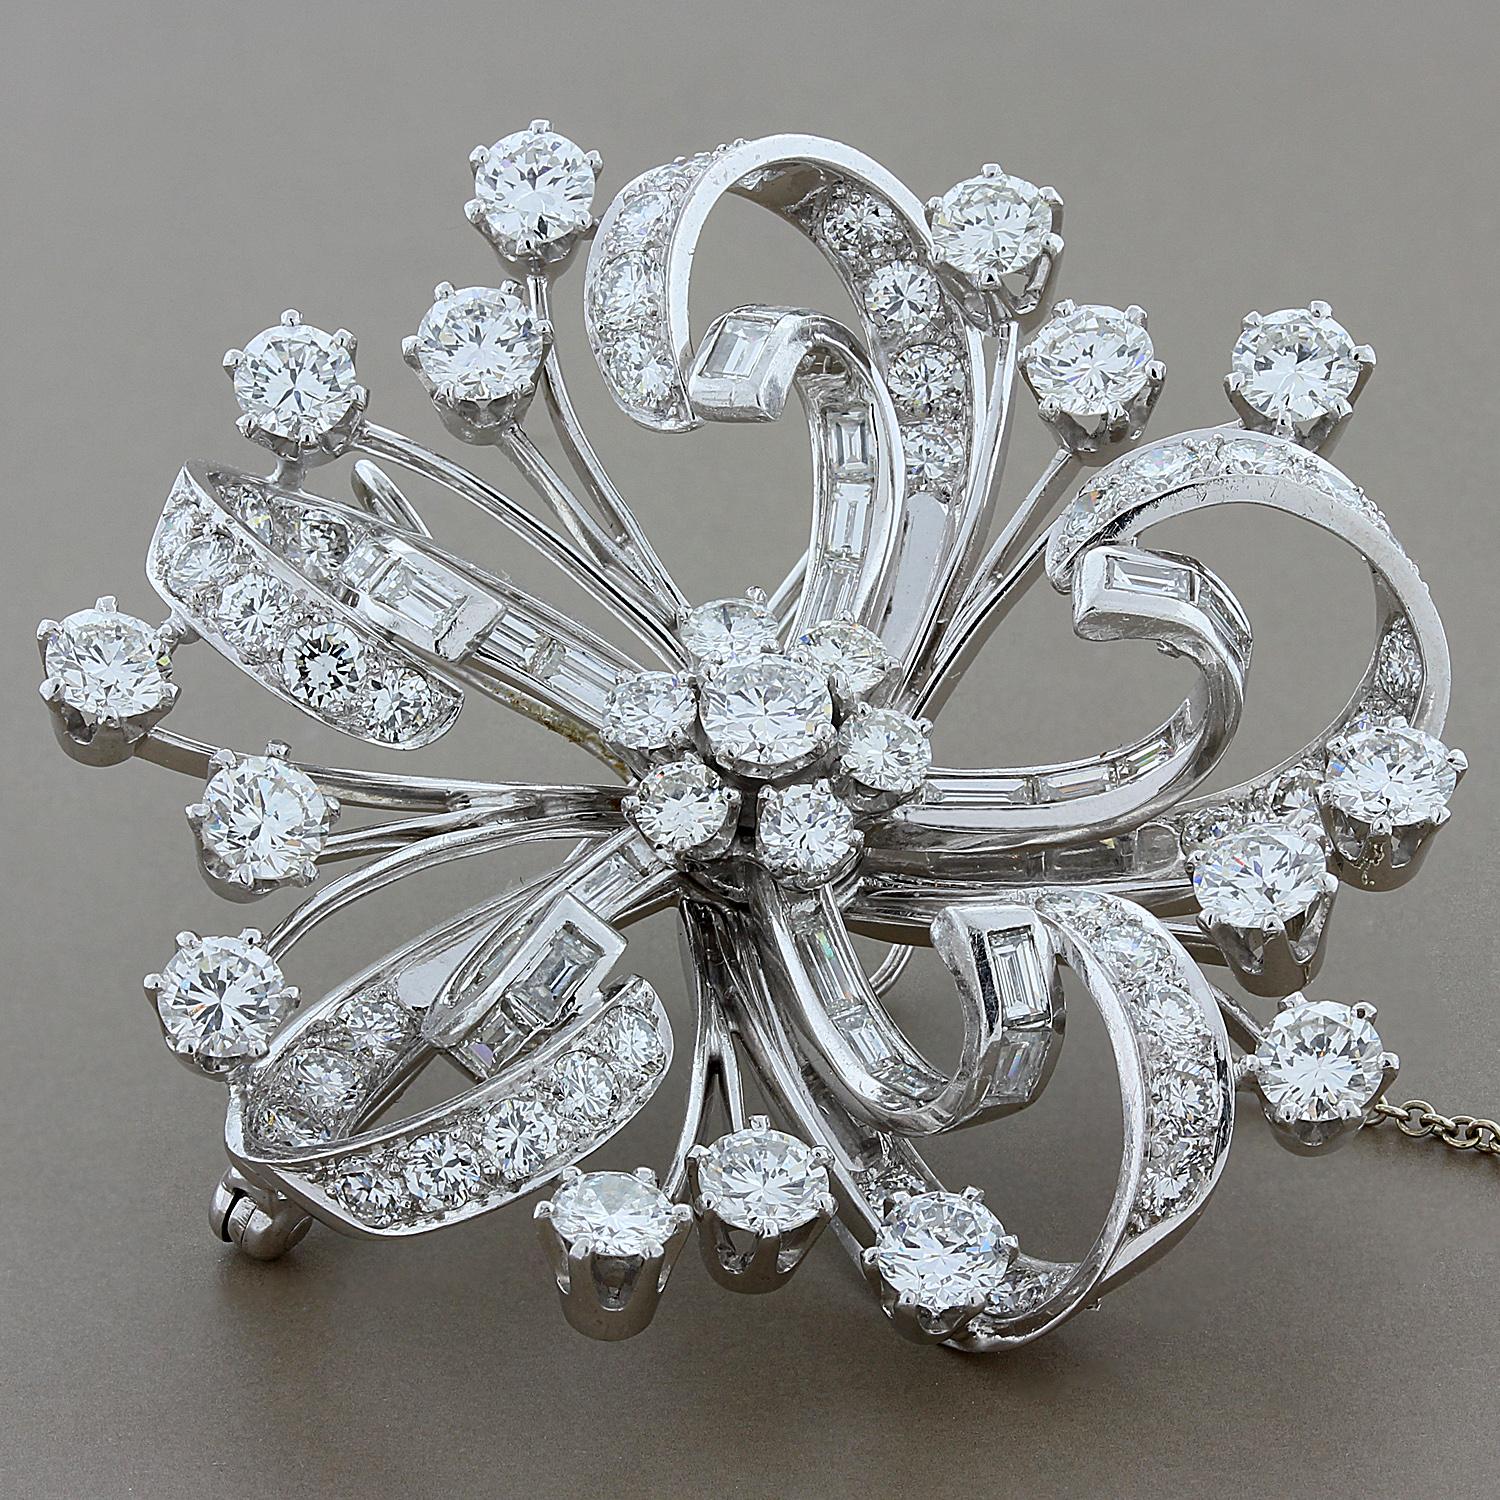 The large flower brooch features 12.80 carats of full cut and baguette diamonds. Set in platinum and completed by a pin stem and catch, along with a safety chain.  This spectacular brooch doubles as a pendant.

Measures 2 inches in diameter
Safety